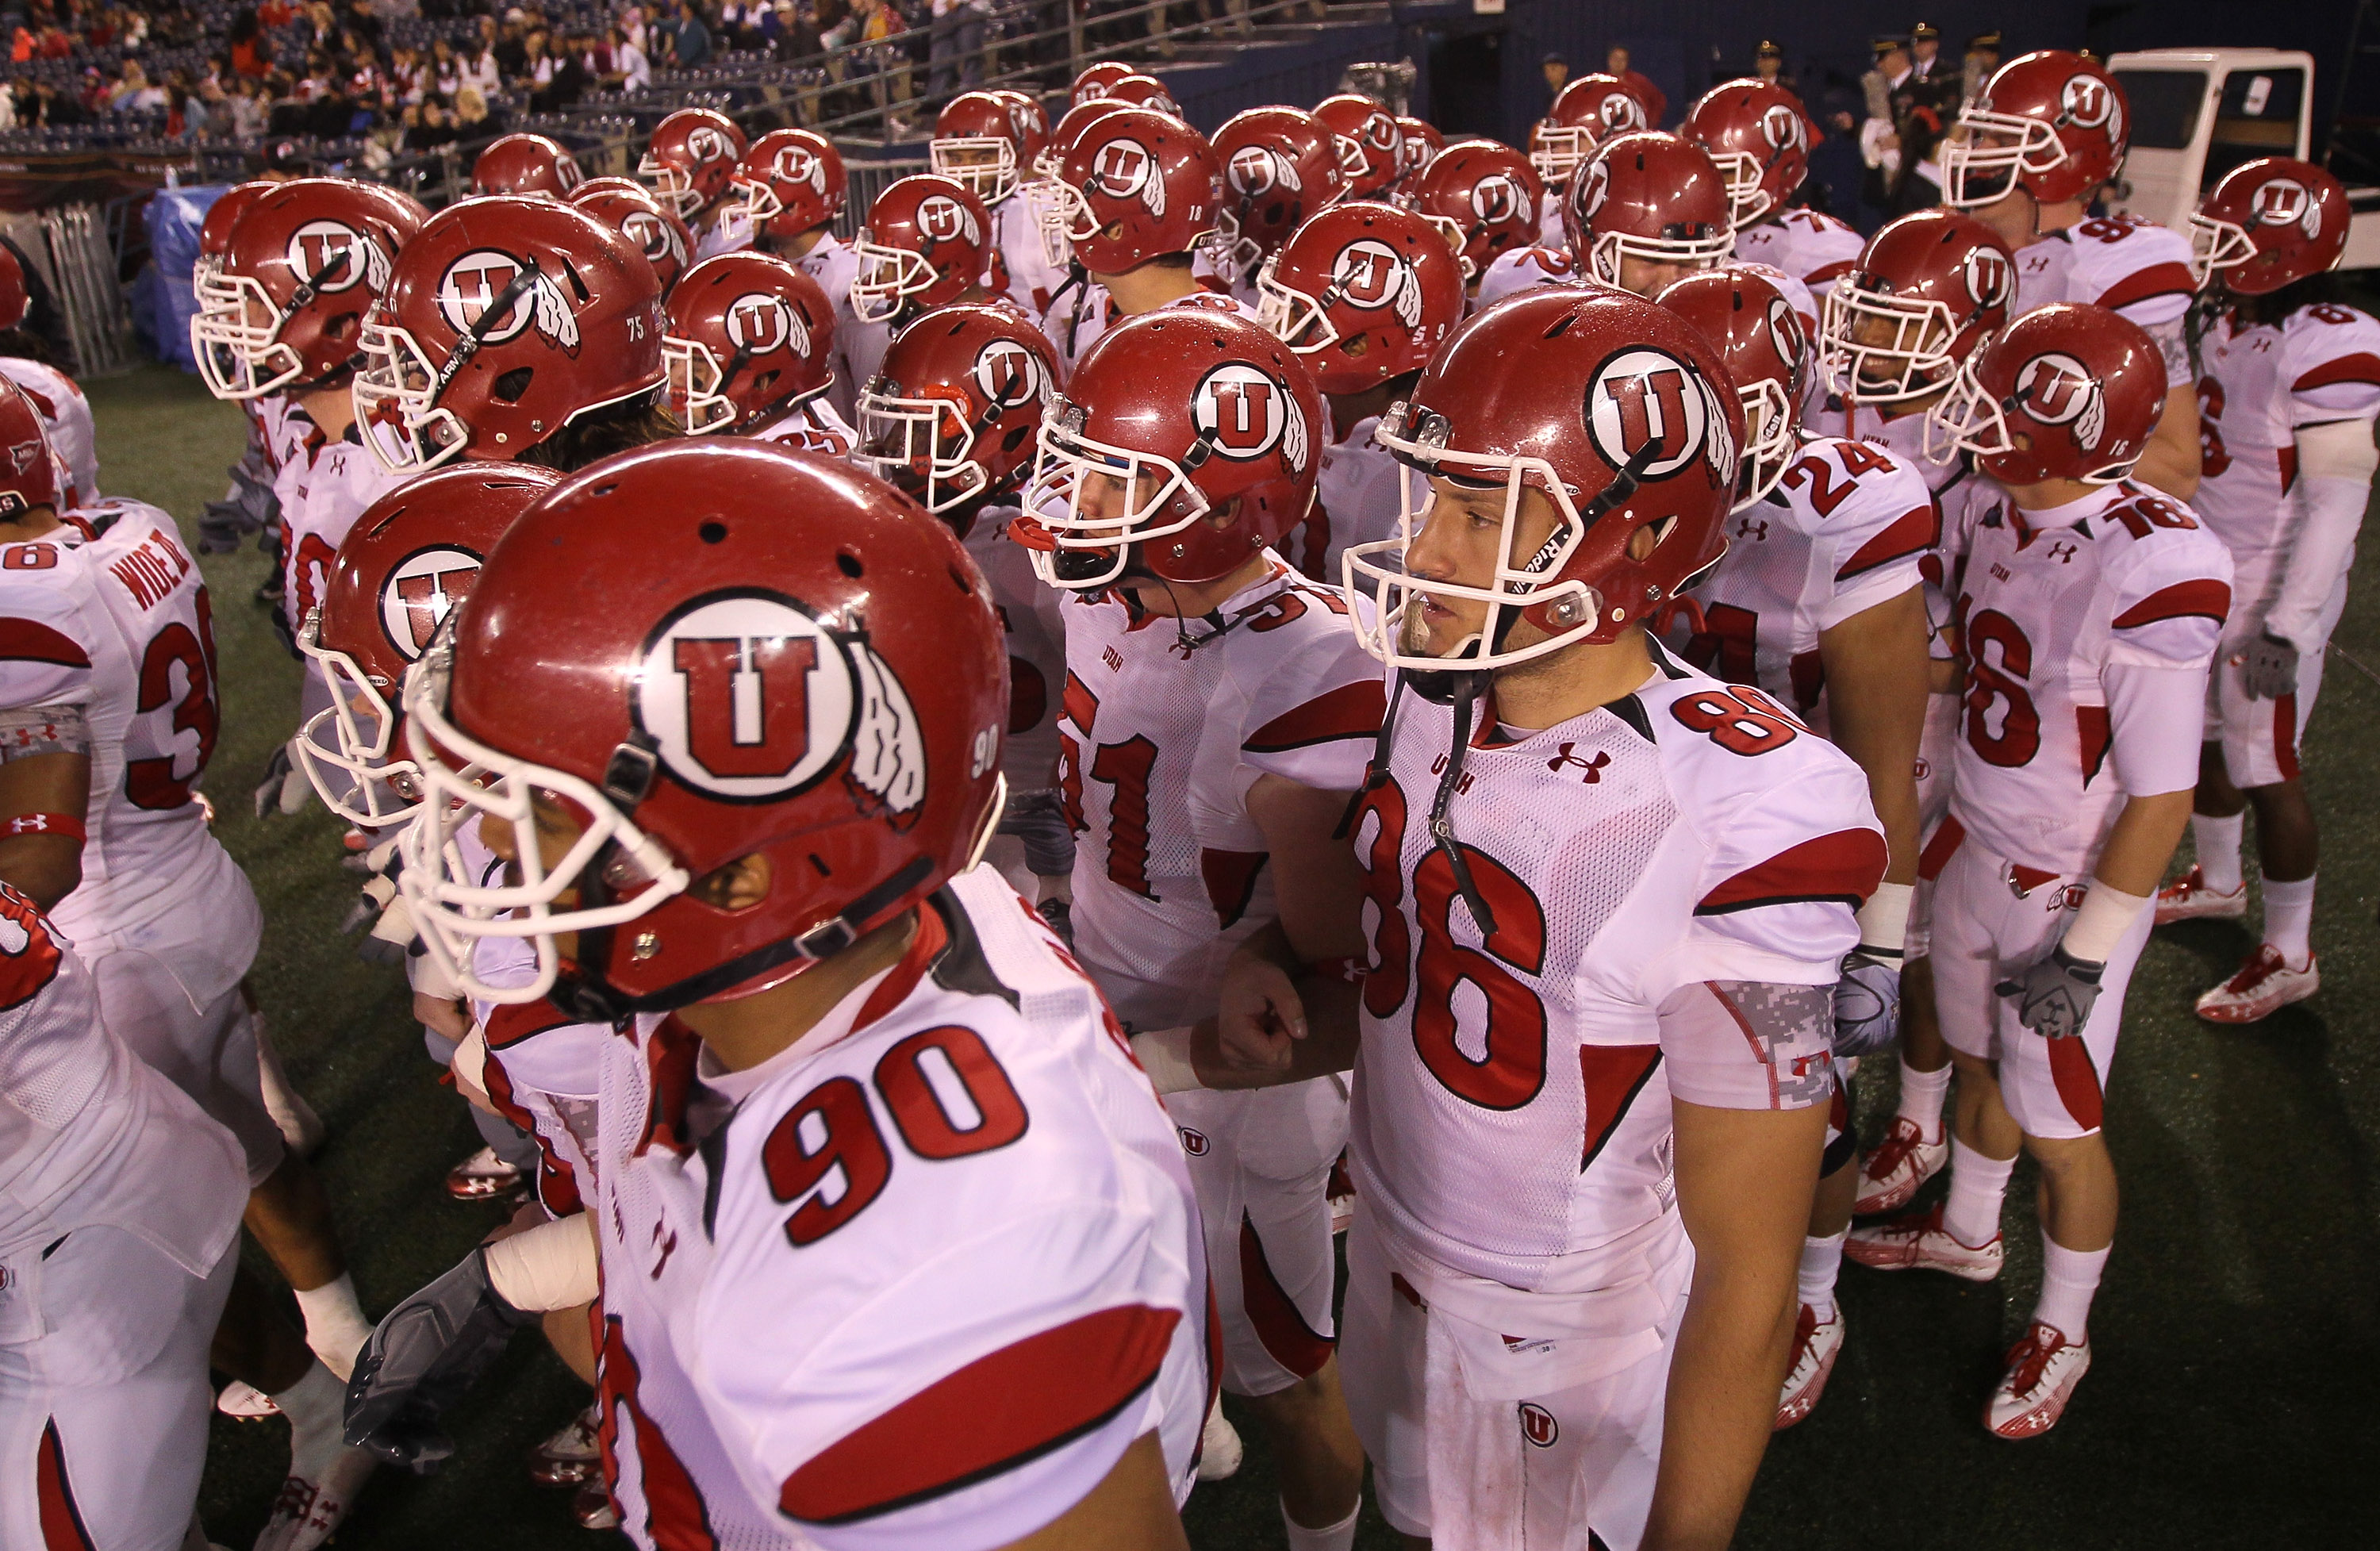 SAN DIEGO - NOVEMBER 20:  The Utah Utes get ready to take the field for the game with the San Diego State Aztecs at Qualcomm Stadium on November 20, 2010 in San Diego, California.  Utah won 38-34.  (Photo by Stephen Dunn/Getty Images)